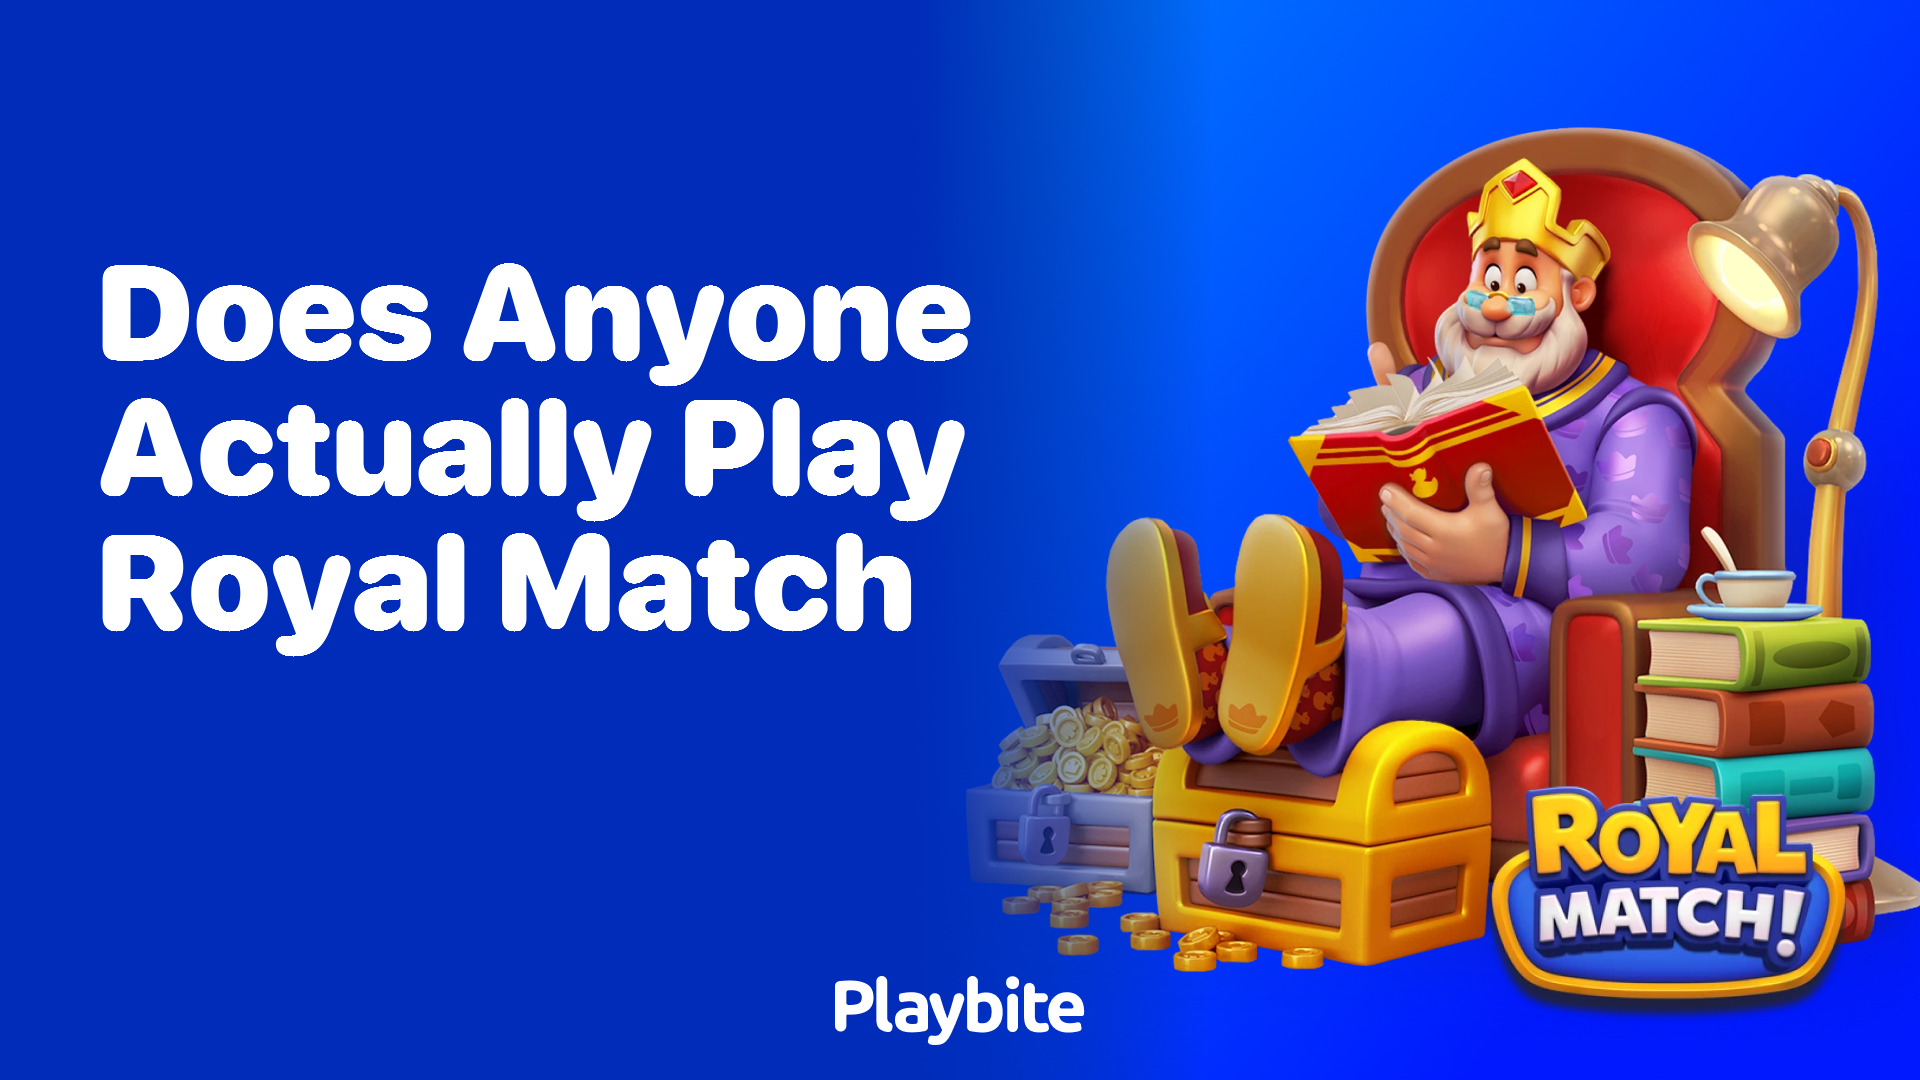 Do people actually play Royal Match?